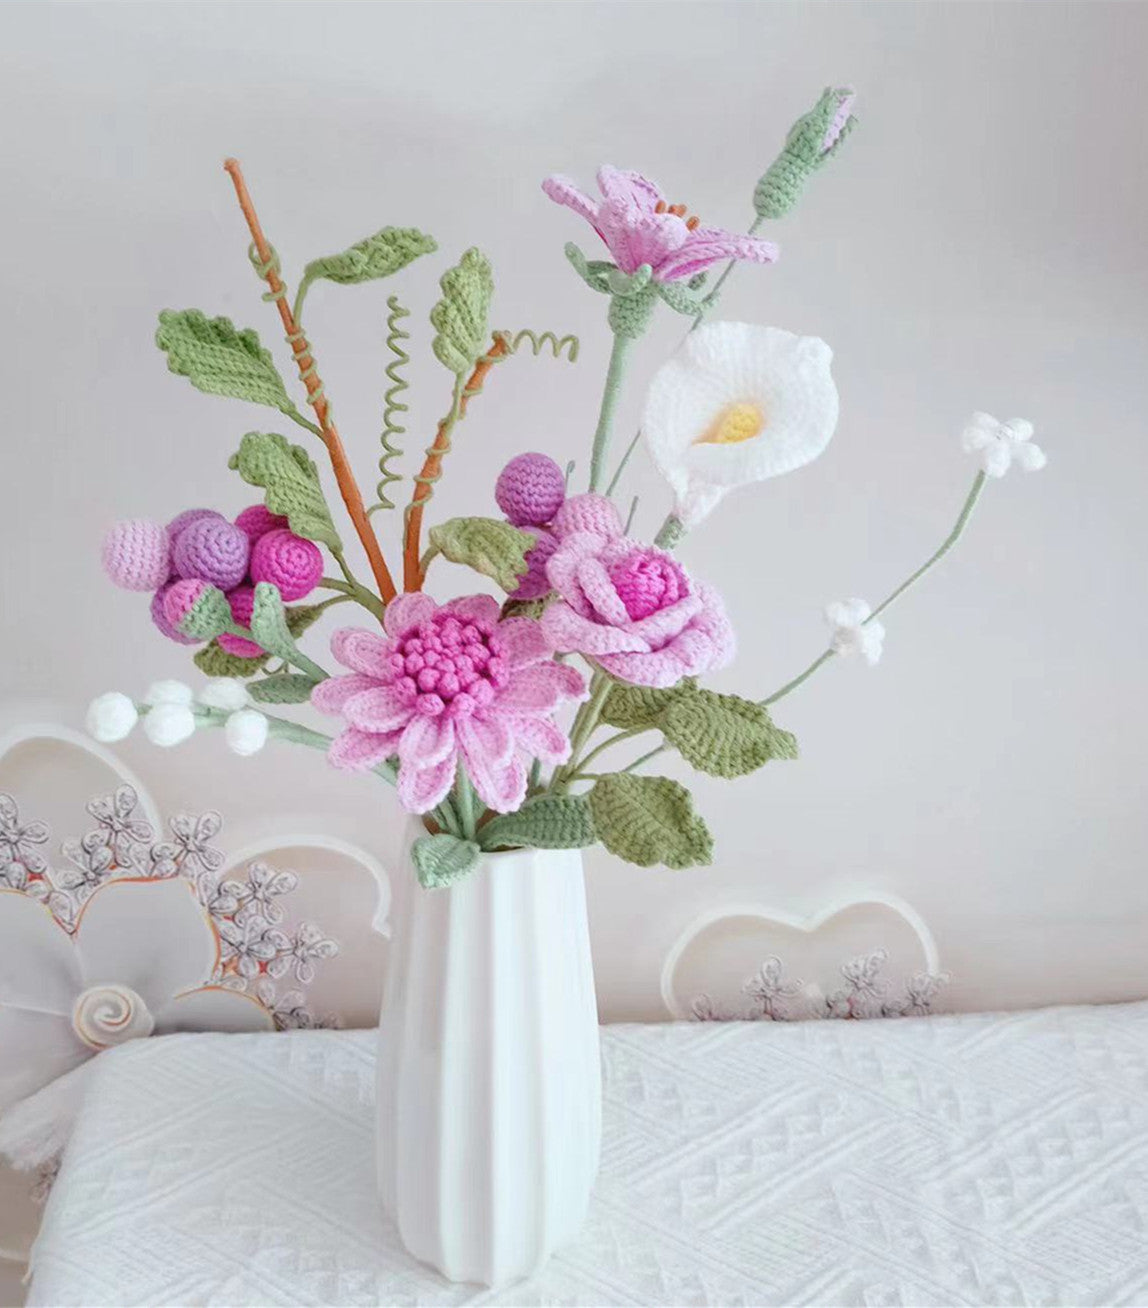 Exquisite Crochet Flower Arrangement for Gifts and Decor